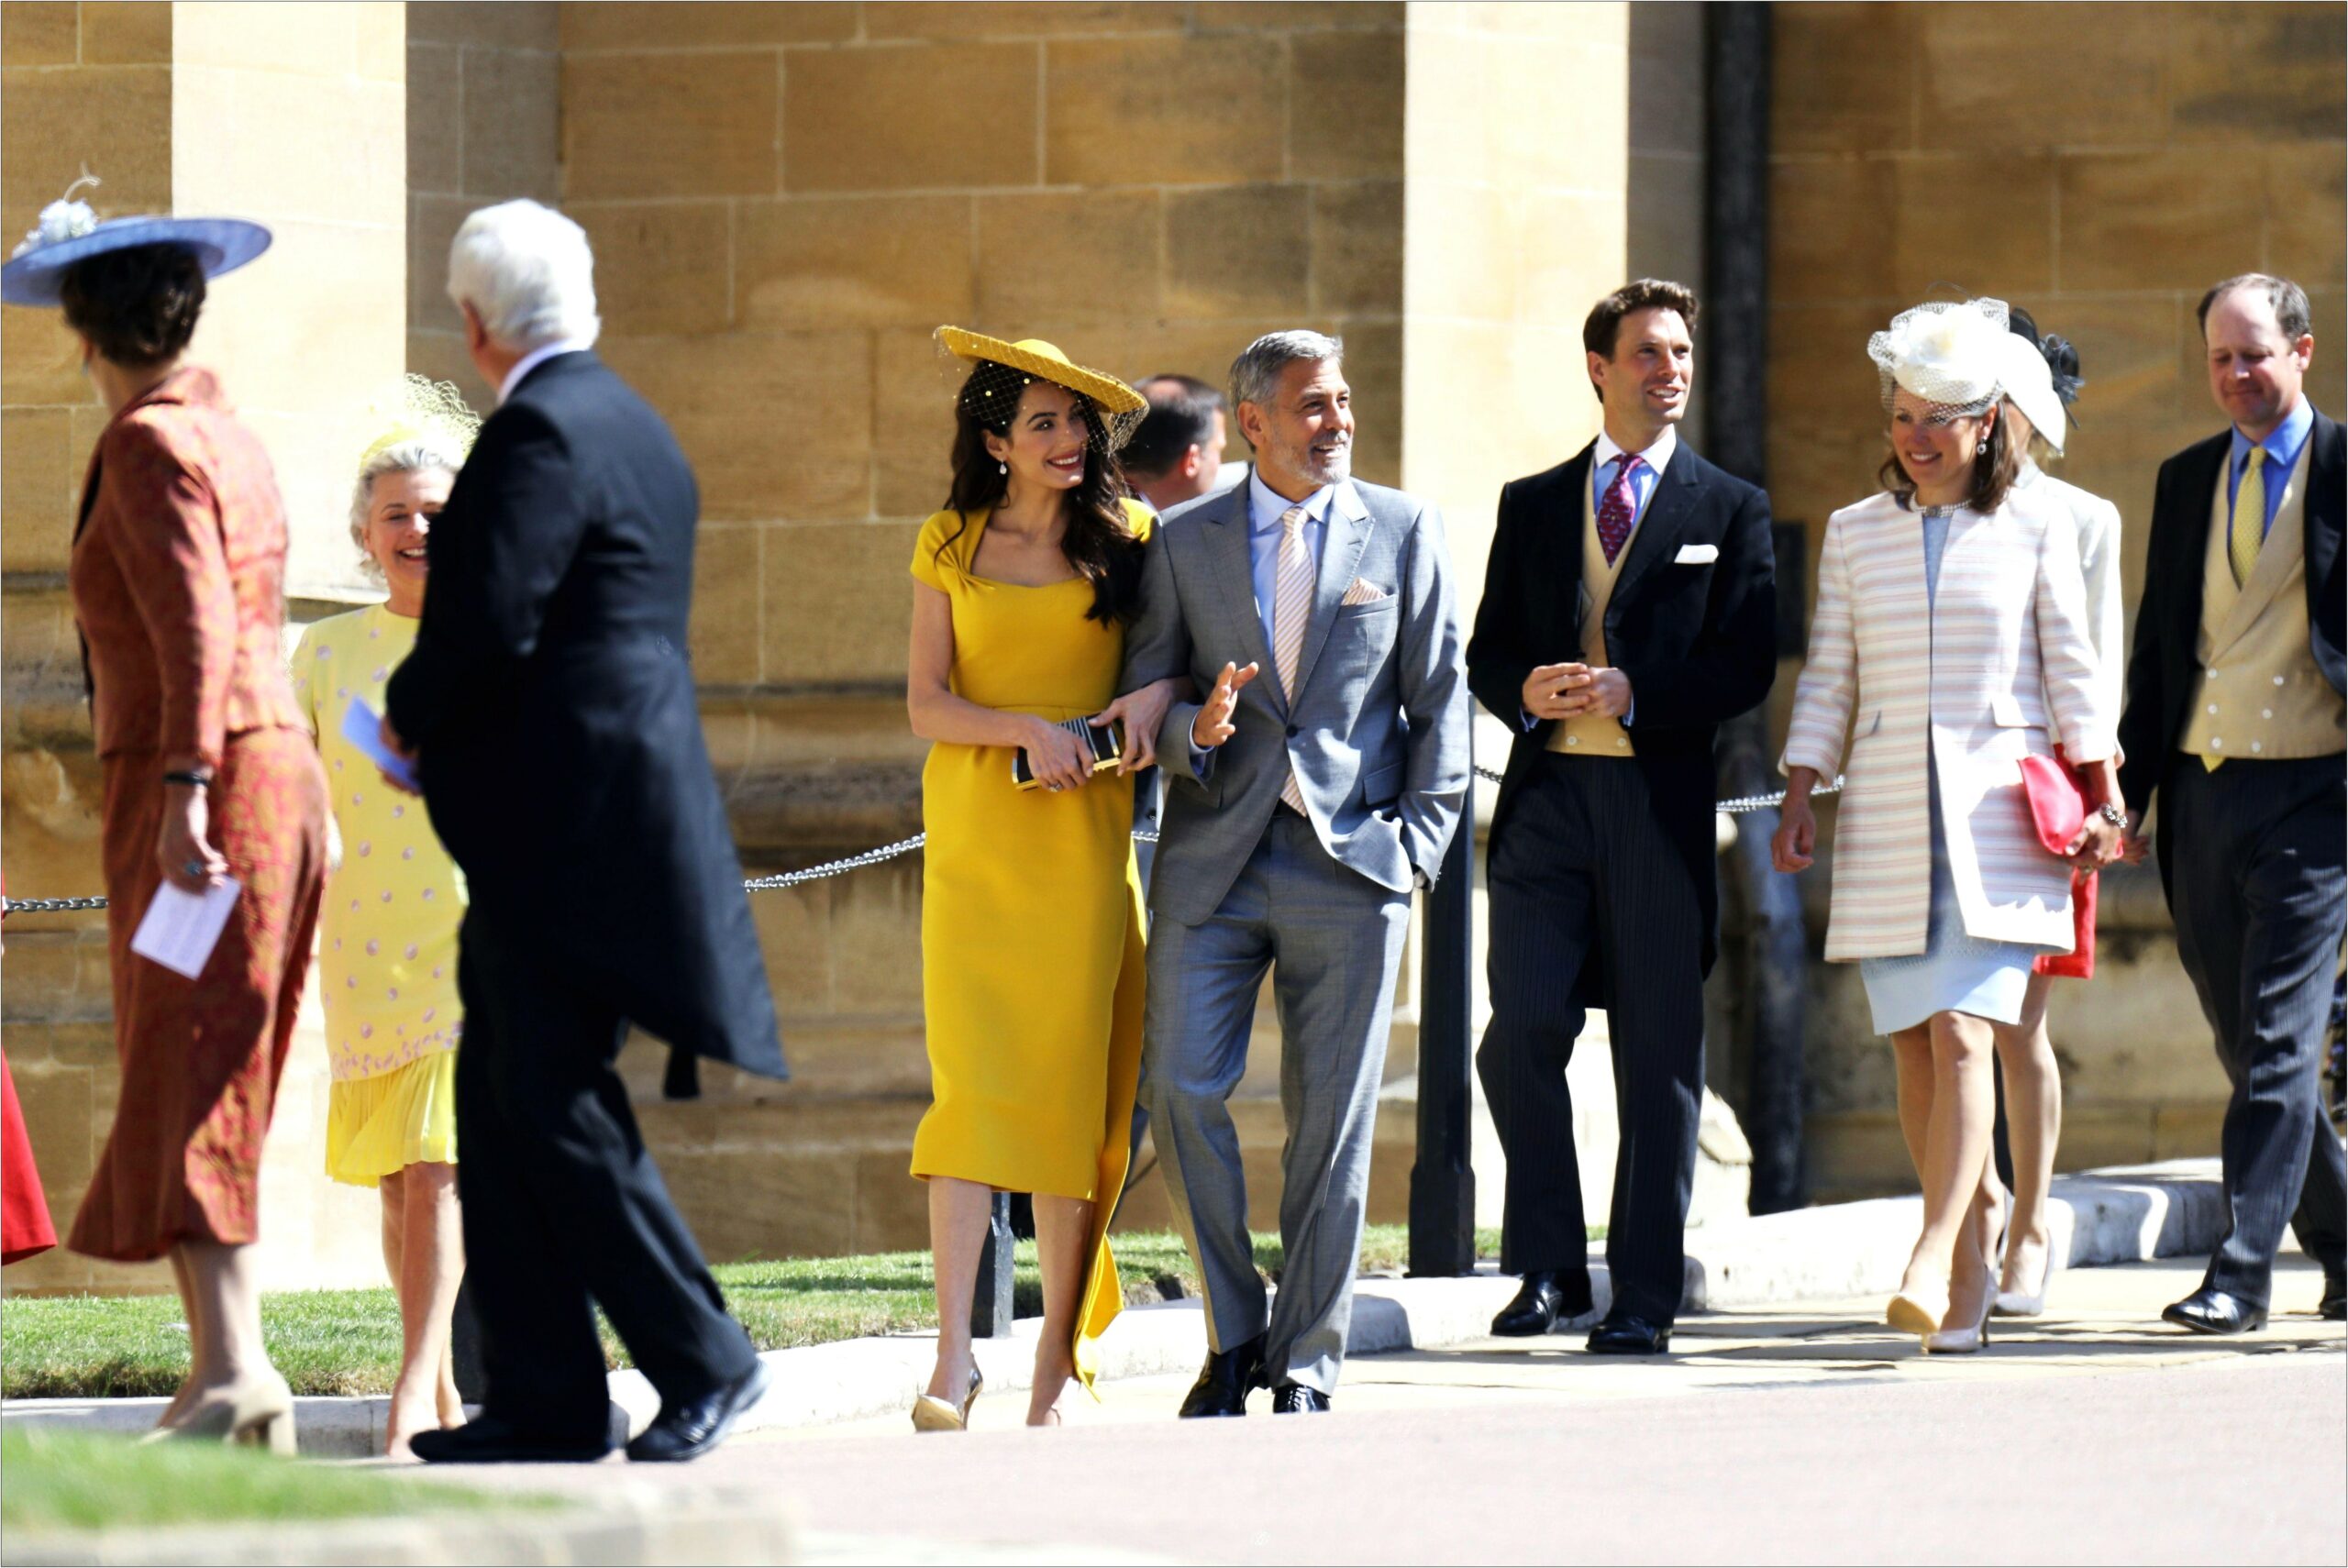 Who Was Invited To Prince Harry's Wedding